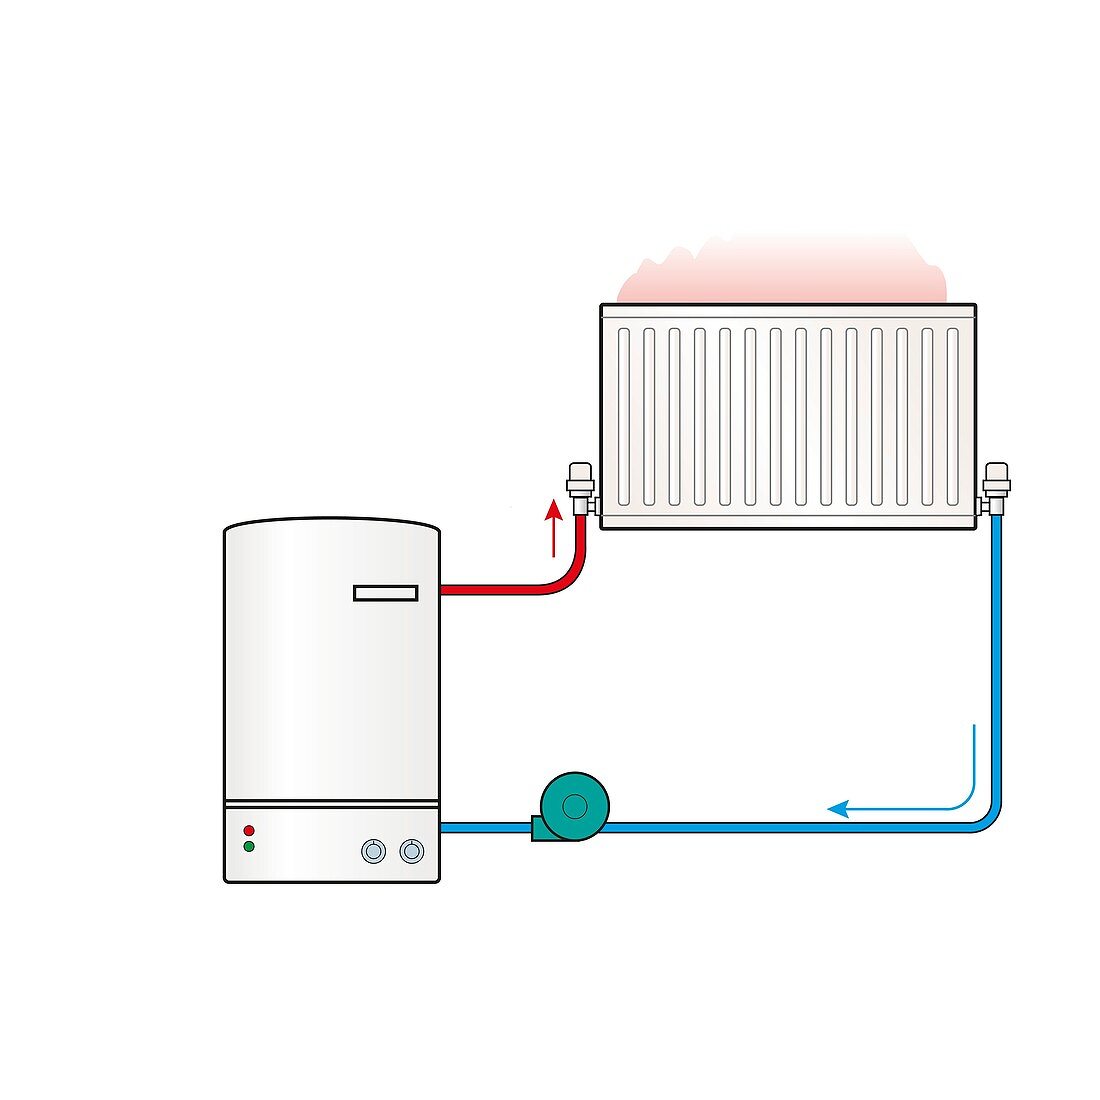 Central heating circuit, illustration